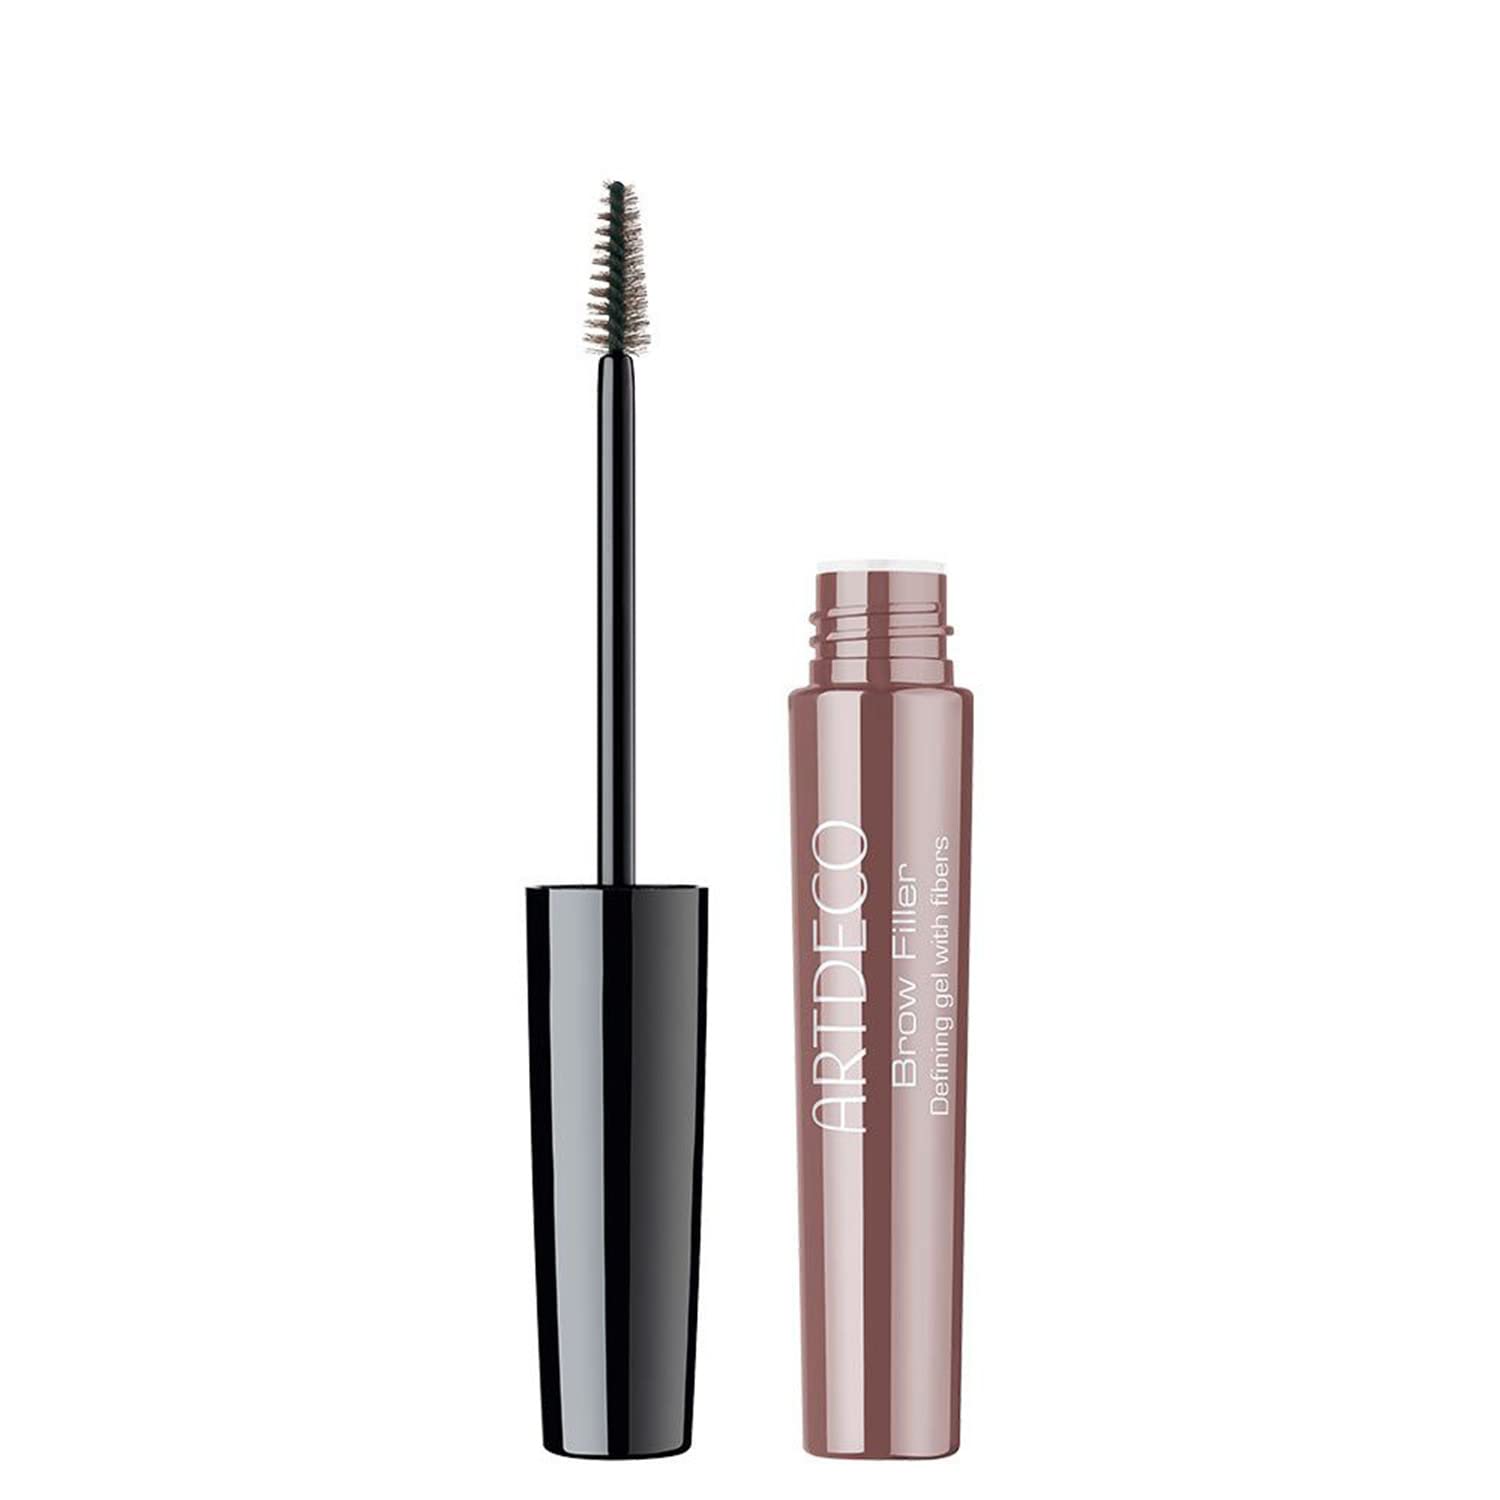 ARTDECO Brow Filler - Light Brown N°02 - Make Brows Fuller & Thicker - Tinted Gel Shapes, Defines Brows & Fixes Them in Place - Mini Brush for Easy Application - Eyebrow Gel - Eye Makeup - 0.24